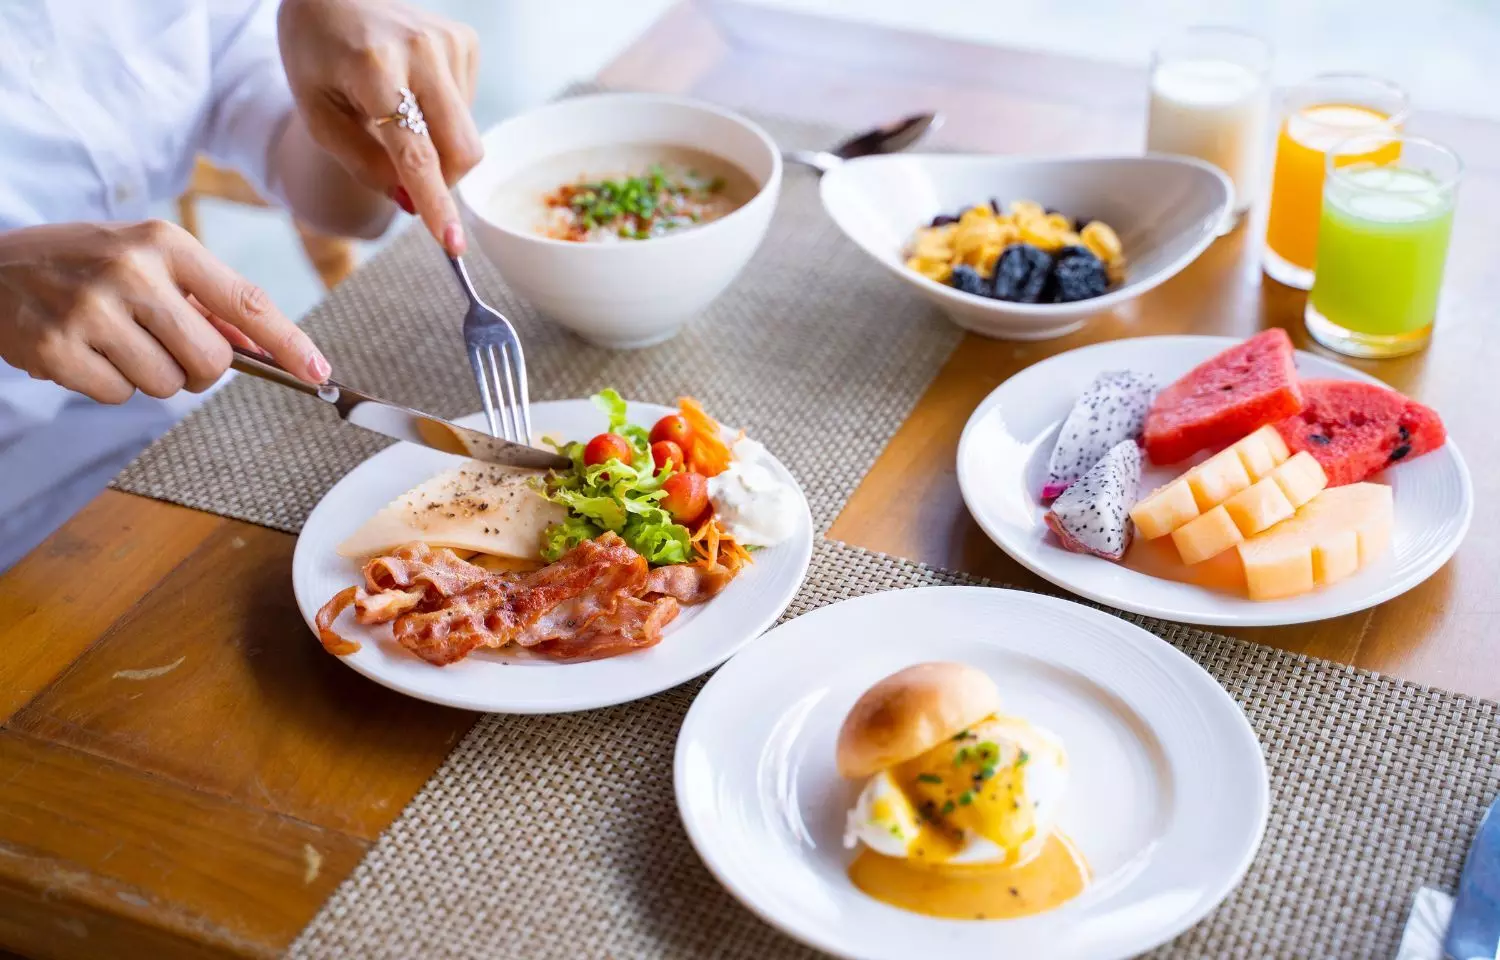 Heavy breakfast may reduce hunger but may not effect weight loss